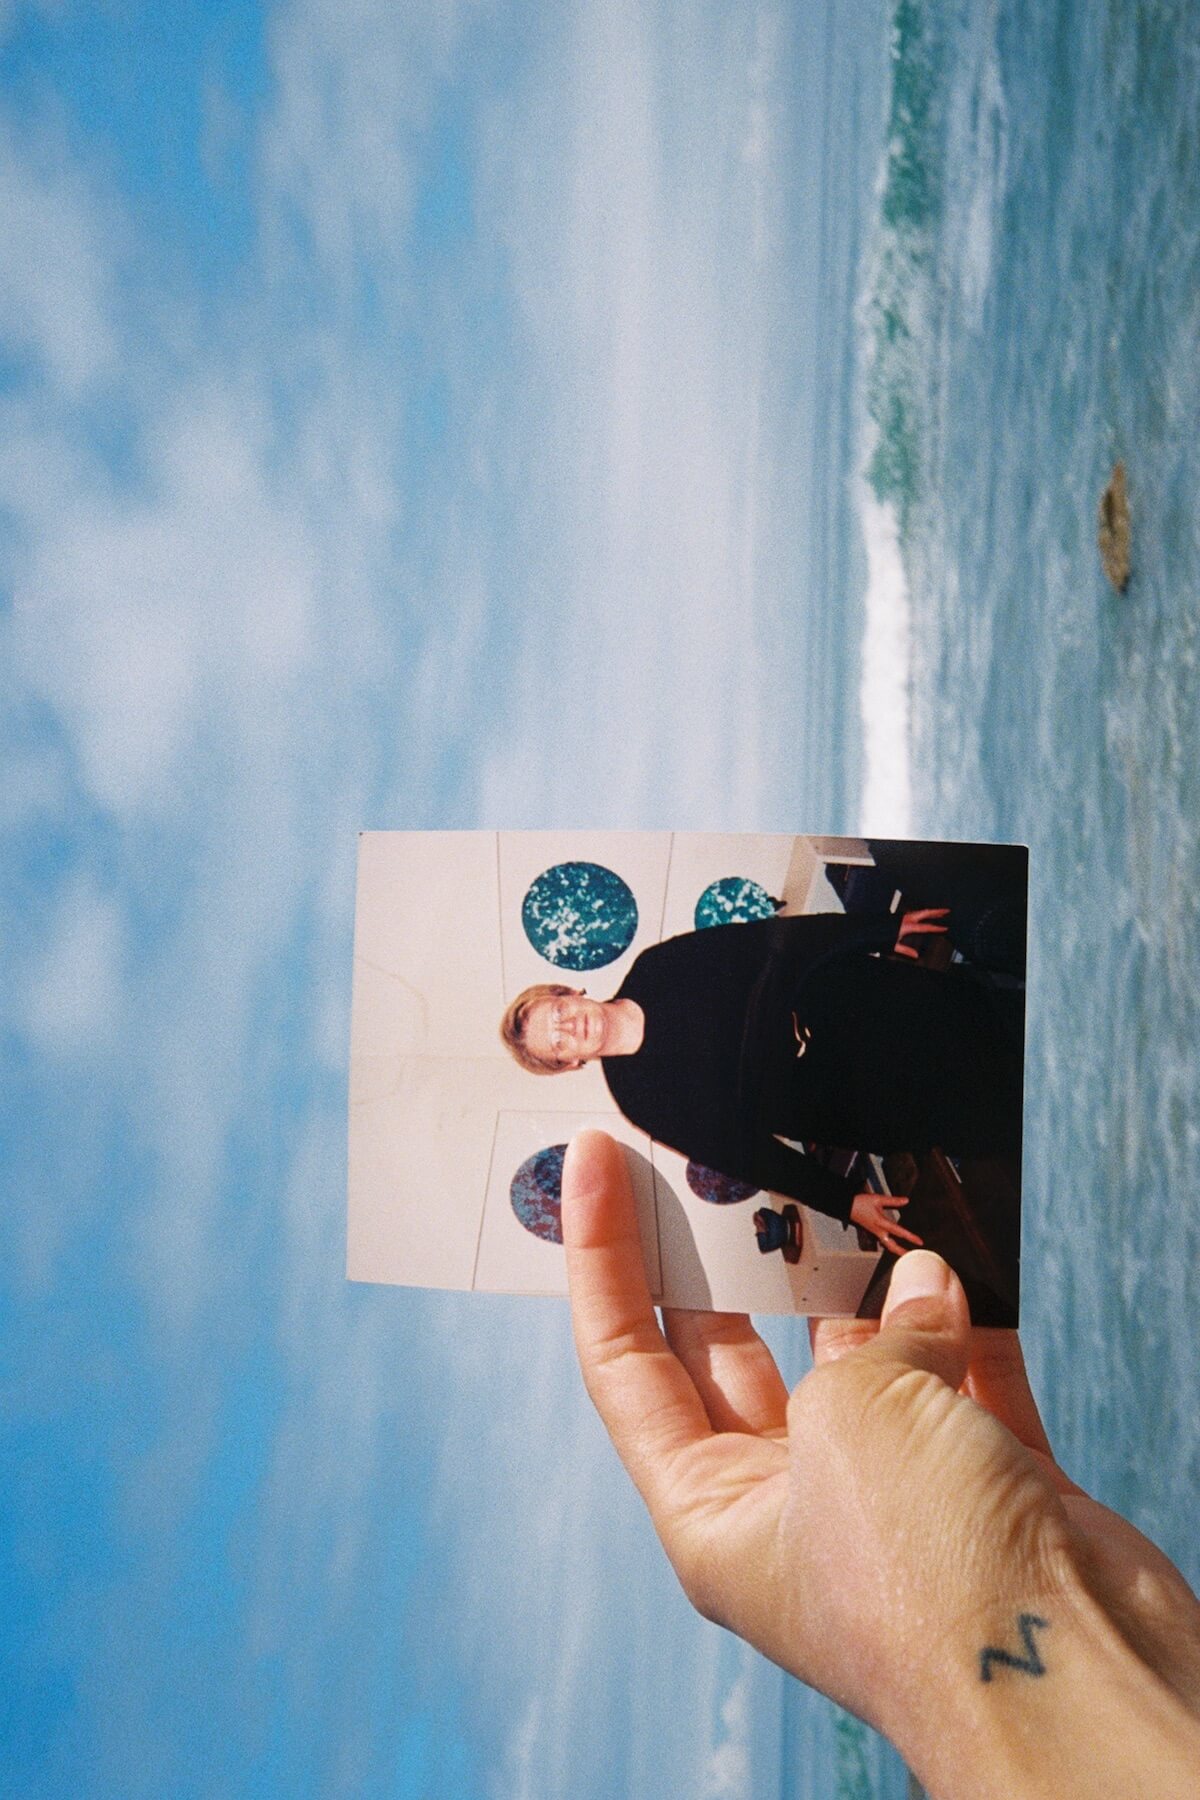 A photograph of a white person's hand holding a photograph of an older white woman. In the background is a large body of water.